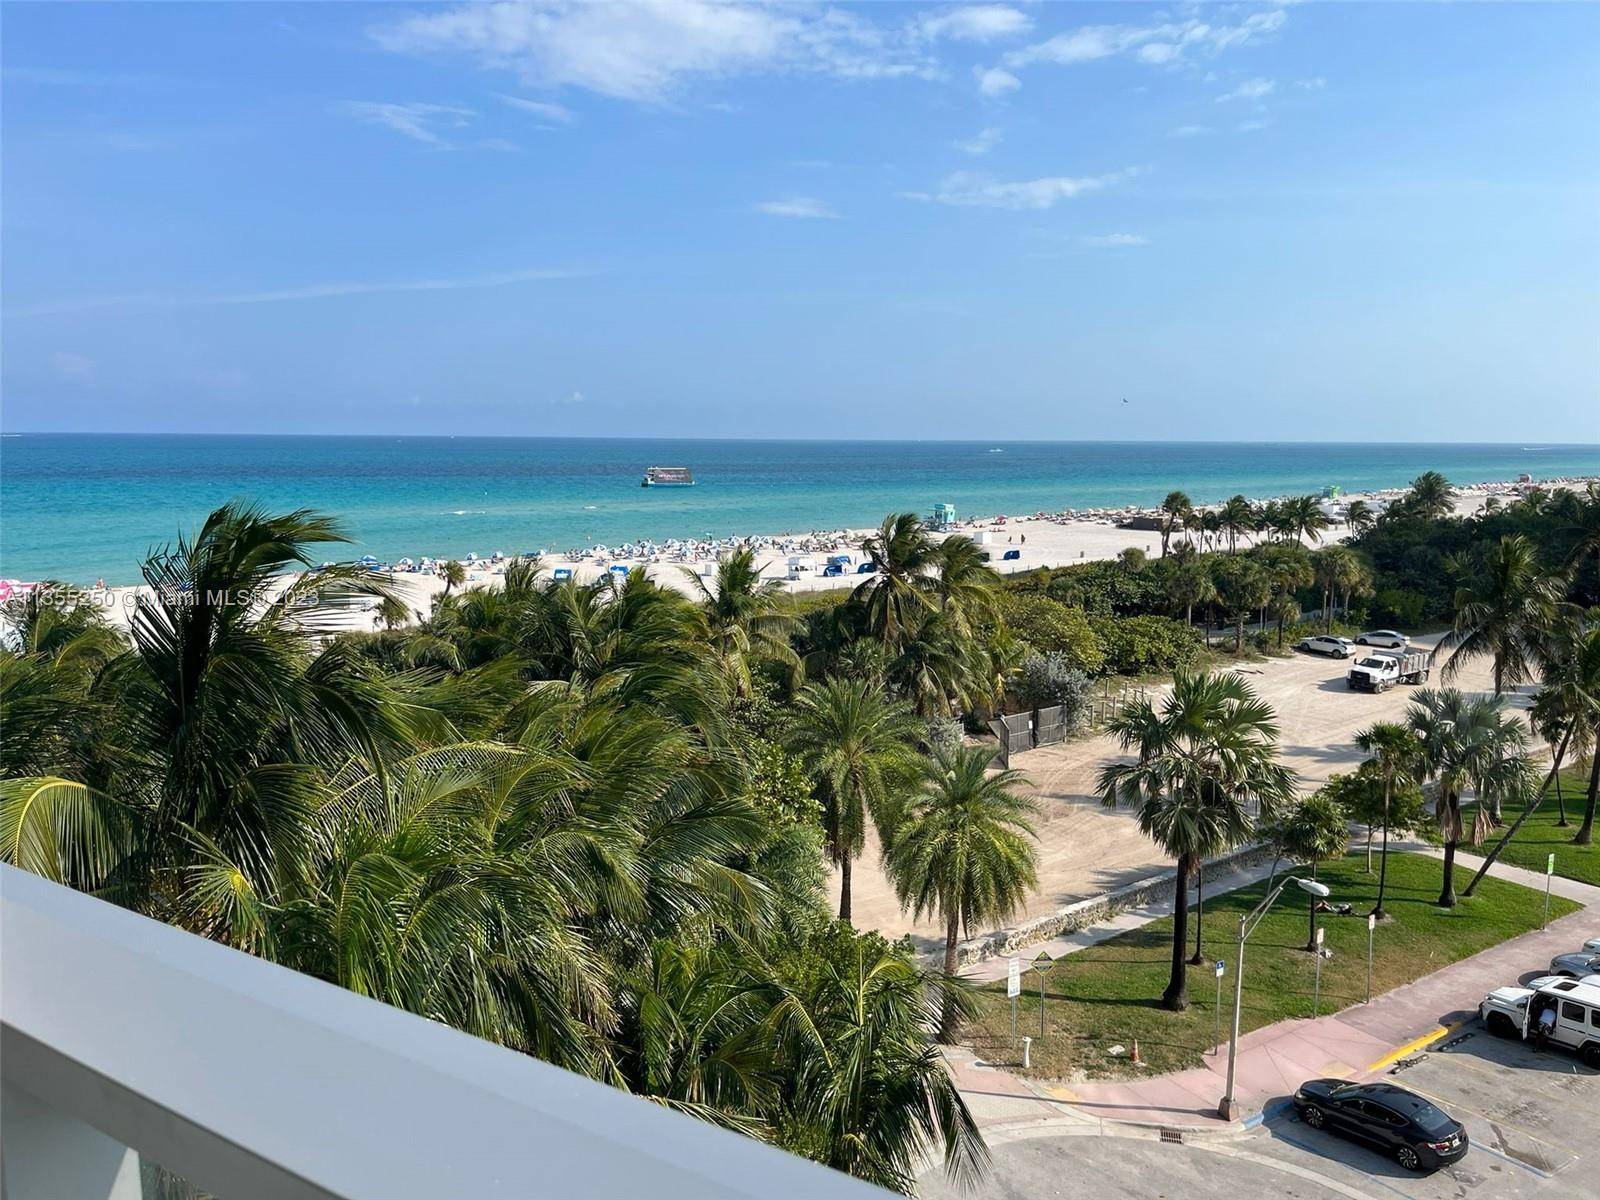 Experience the luxury of resort style living in this exquisite oceanfront studio at the prestigious W South Beach Hotel.